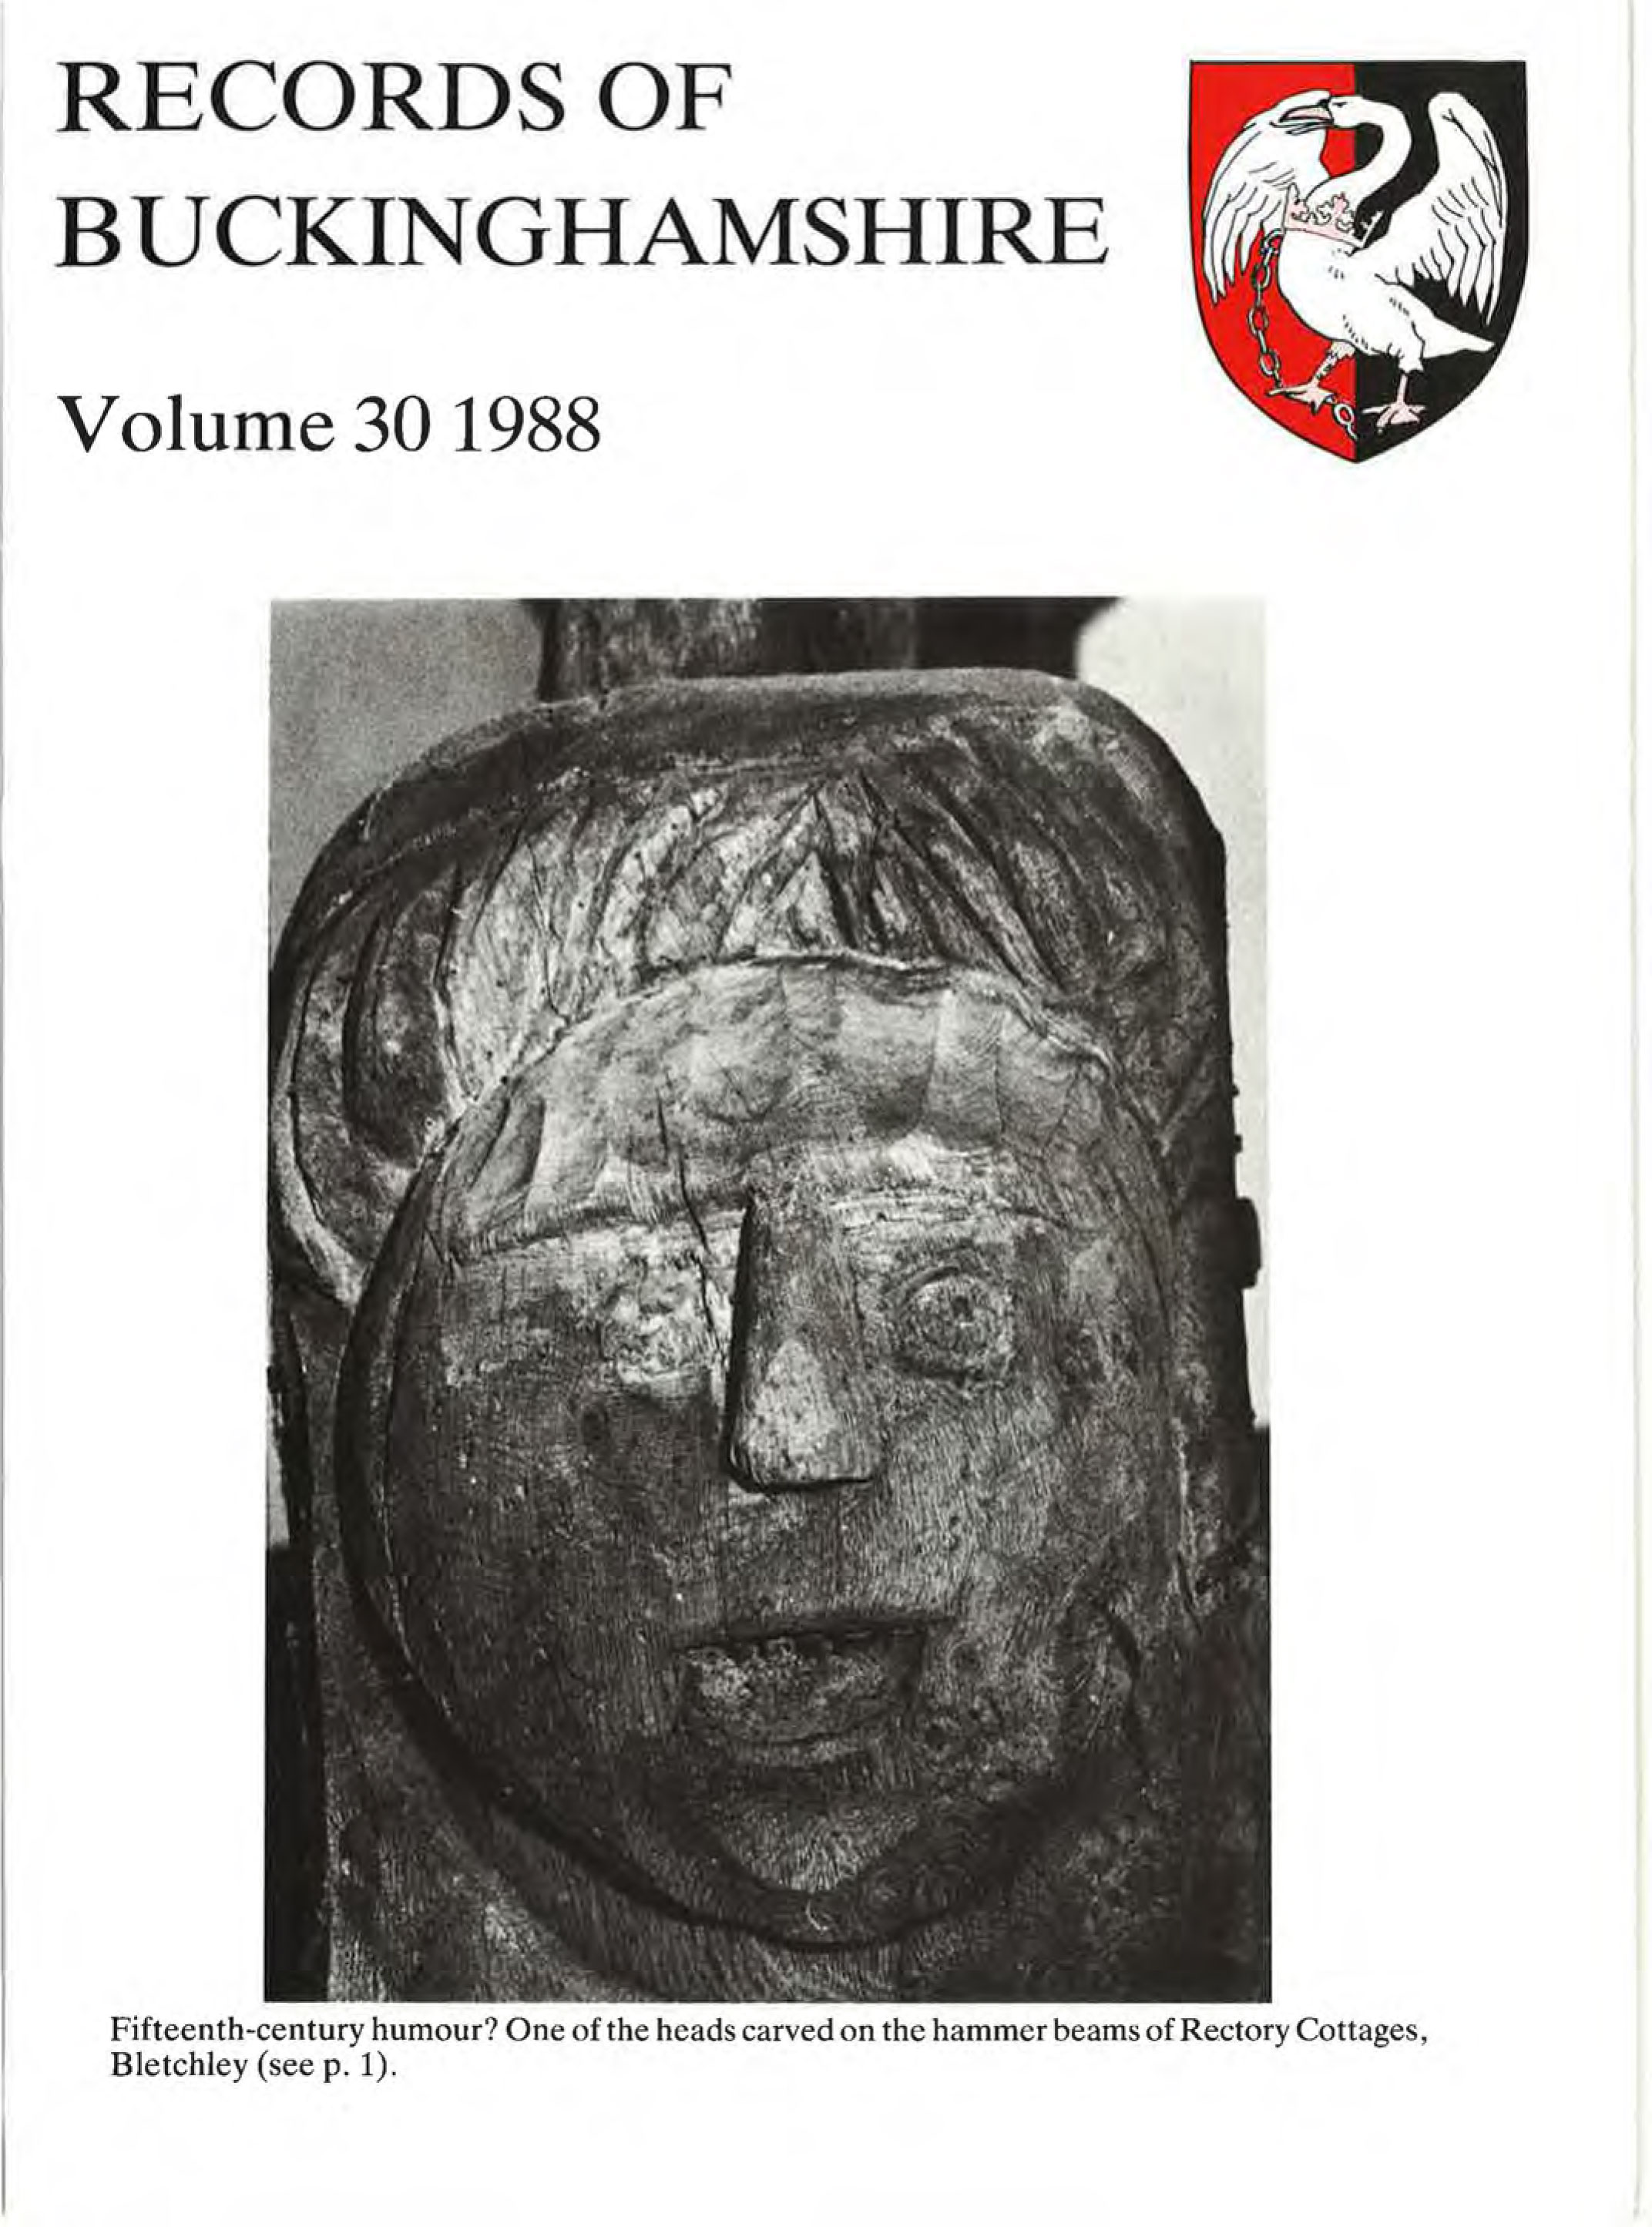 Cover of Records volume 30